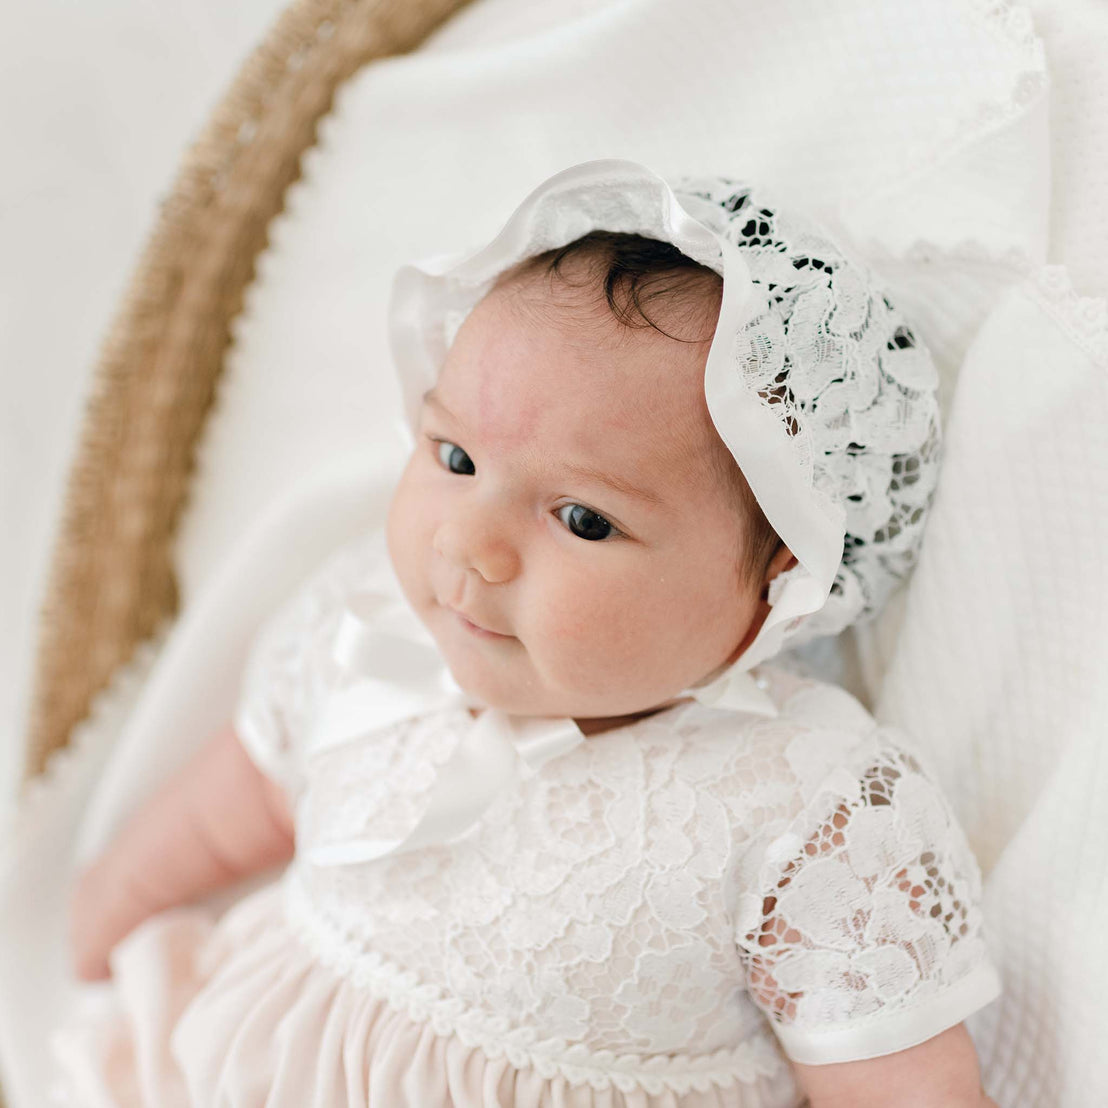 A baby with dark hair and light skin wearing the Rose Layette & Bonnet looks upwards thoughtfully, set against a soft, white background.